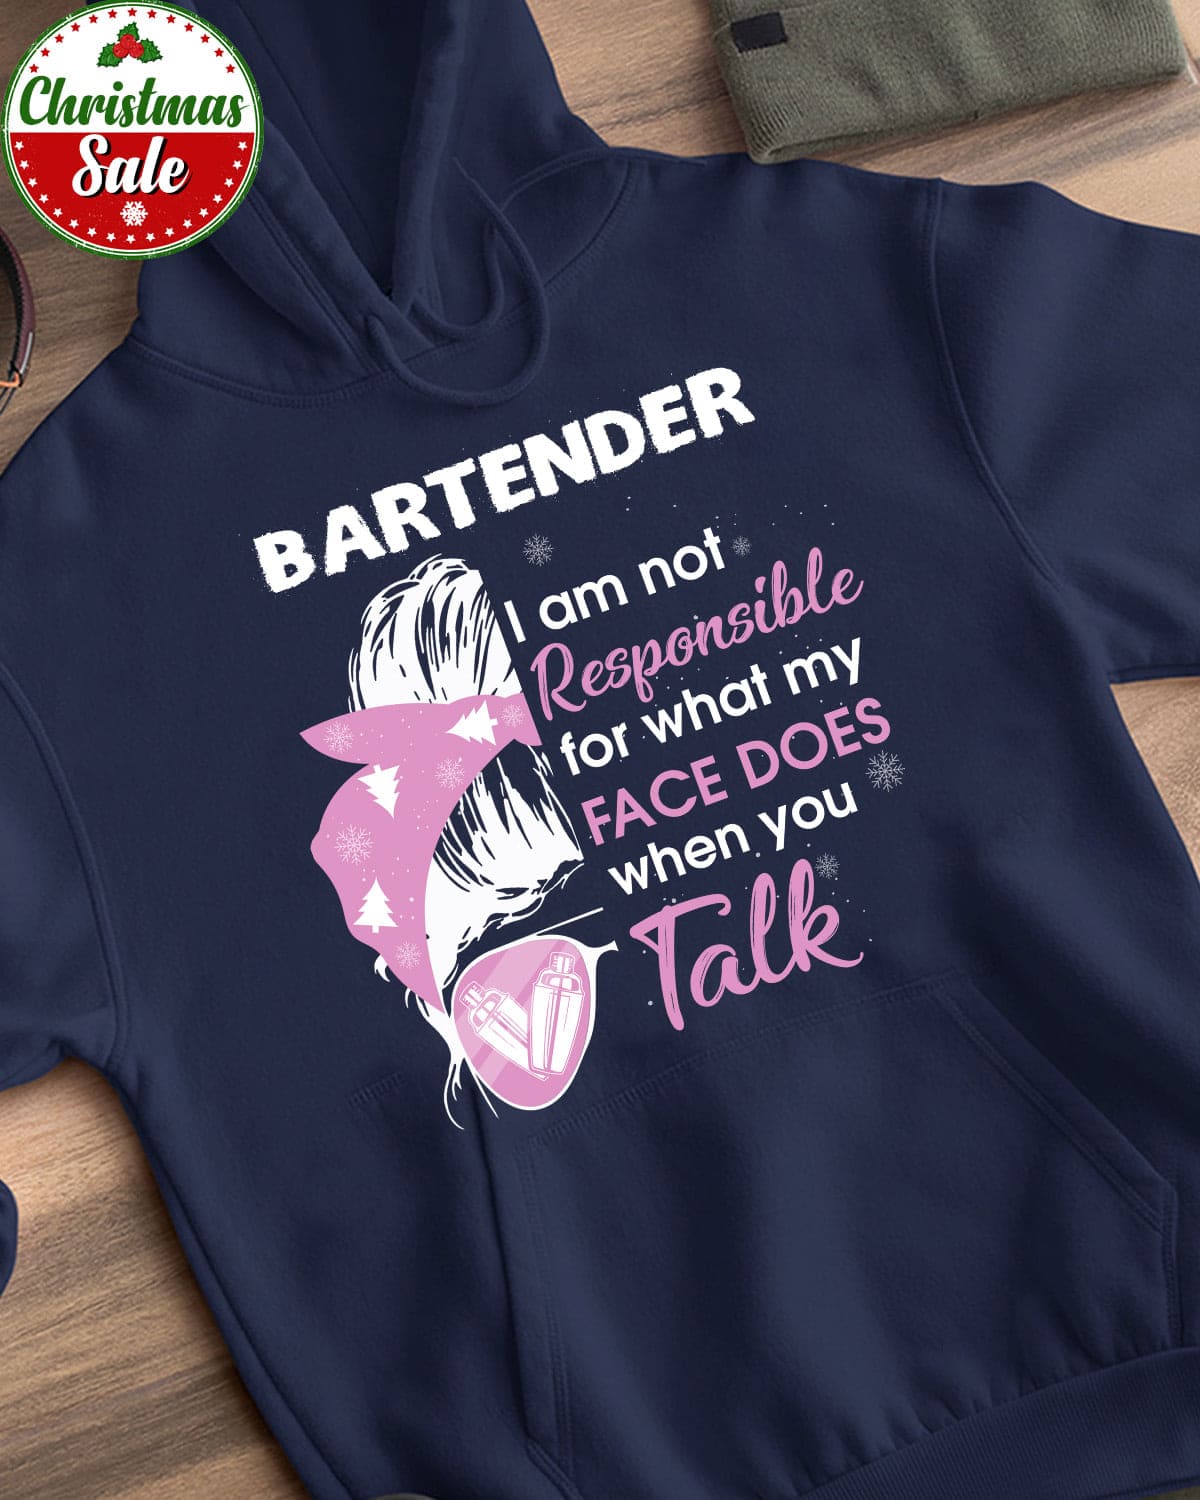 Bartender Woman Face - Bartender i am not responsible for what my face does when you talk